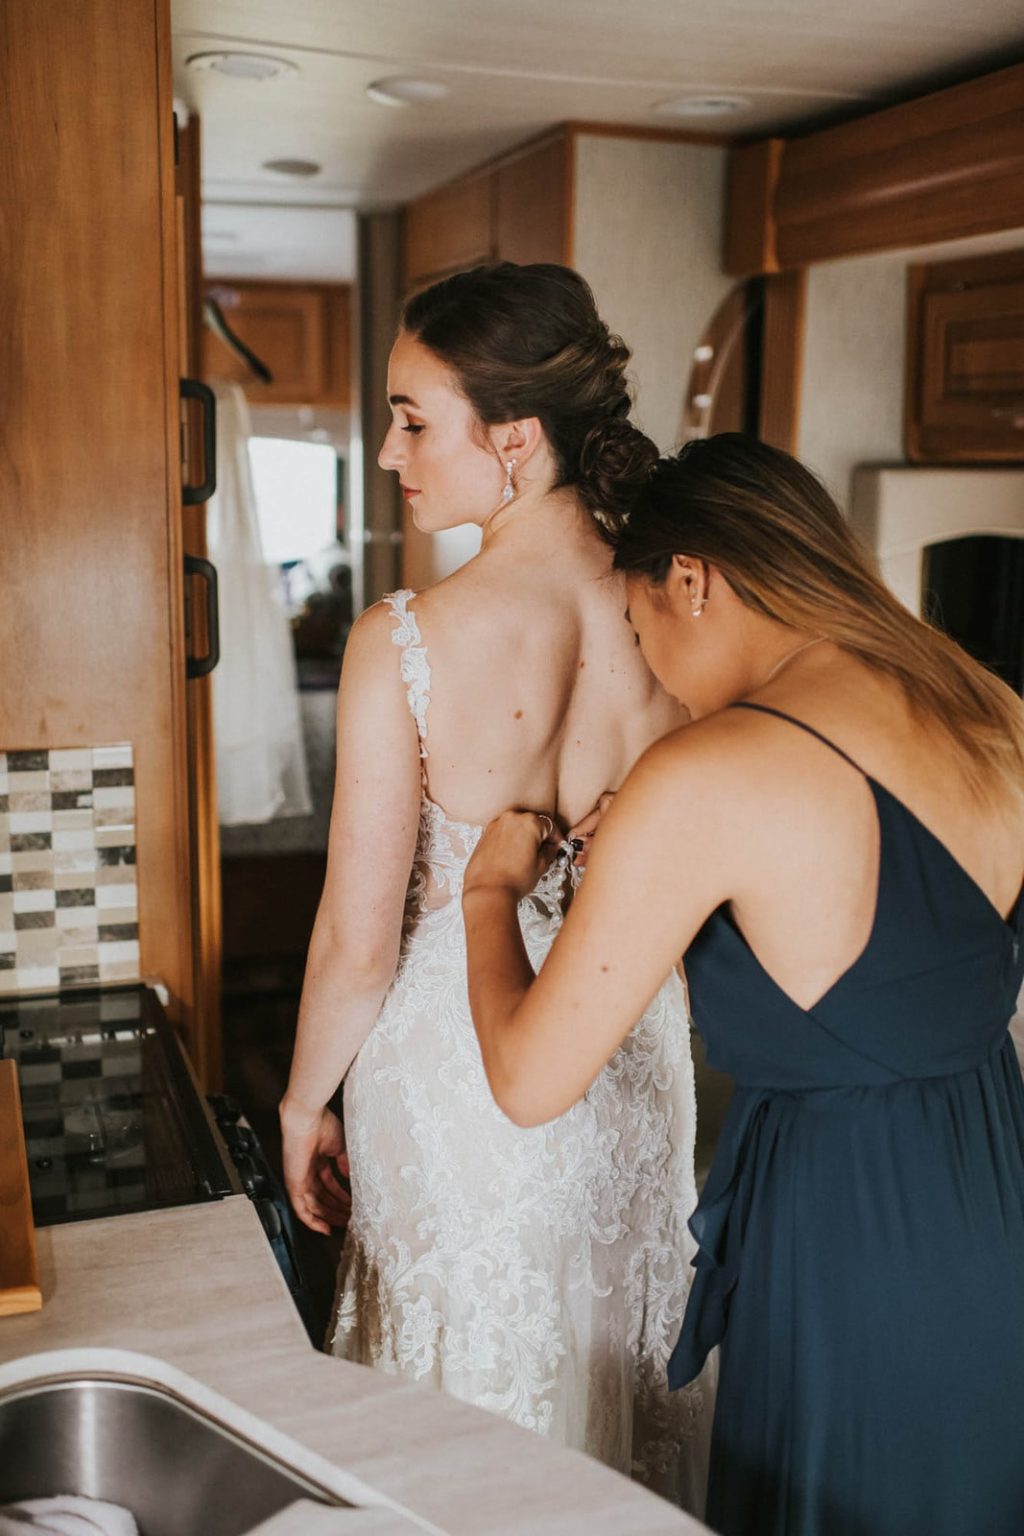 Bride getting her dress on